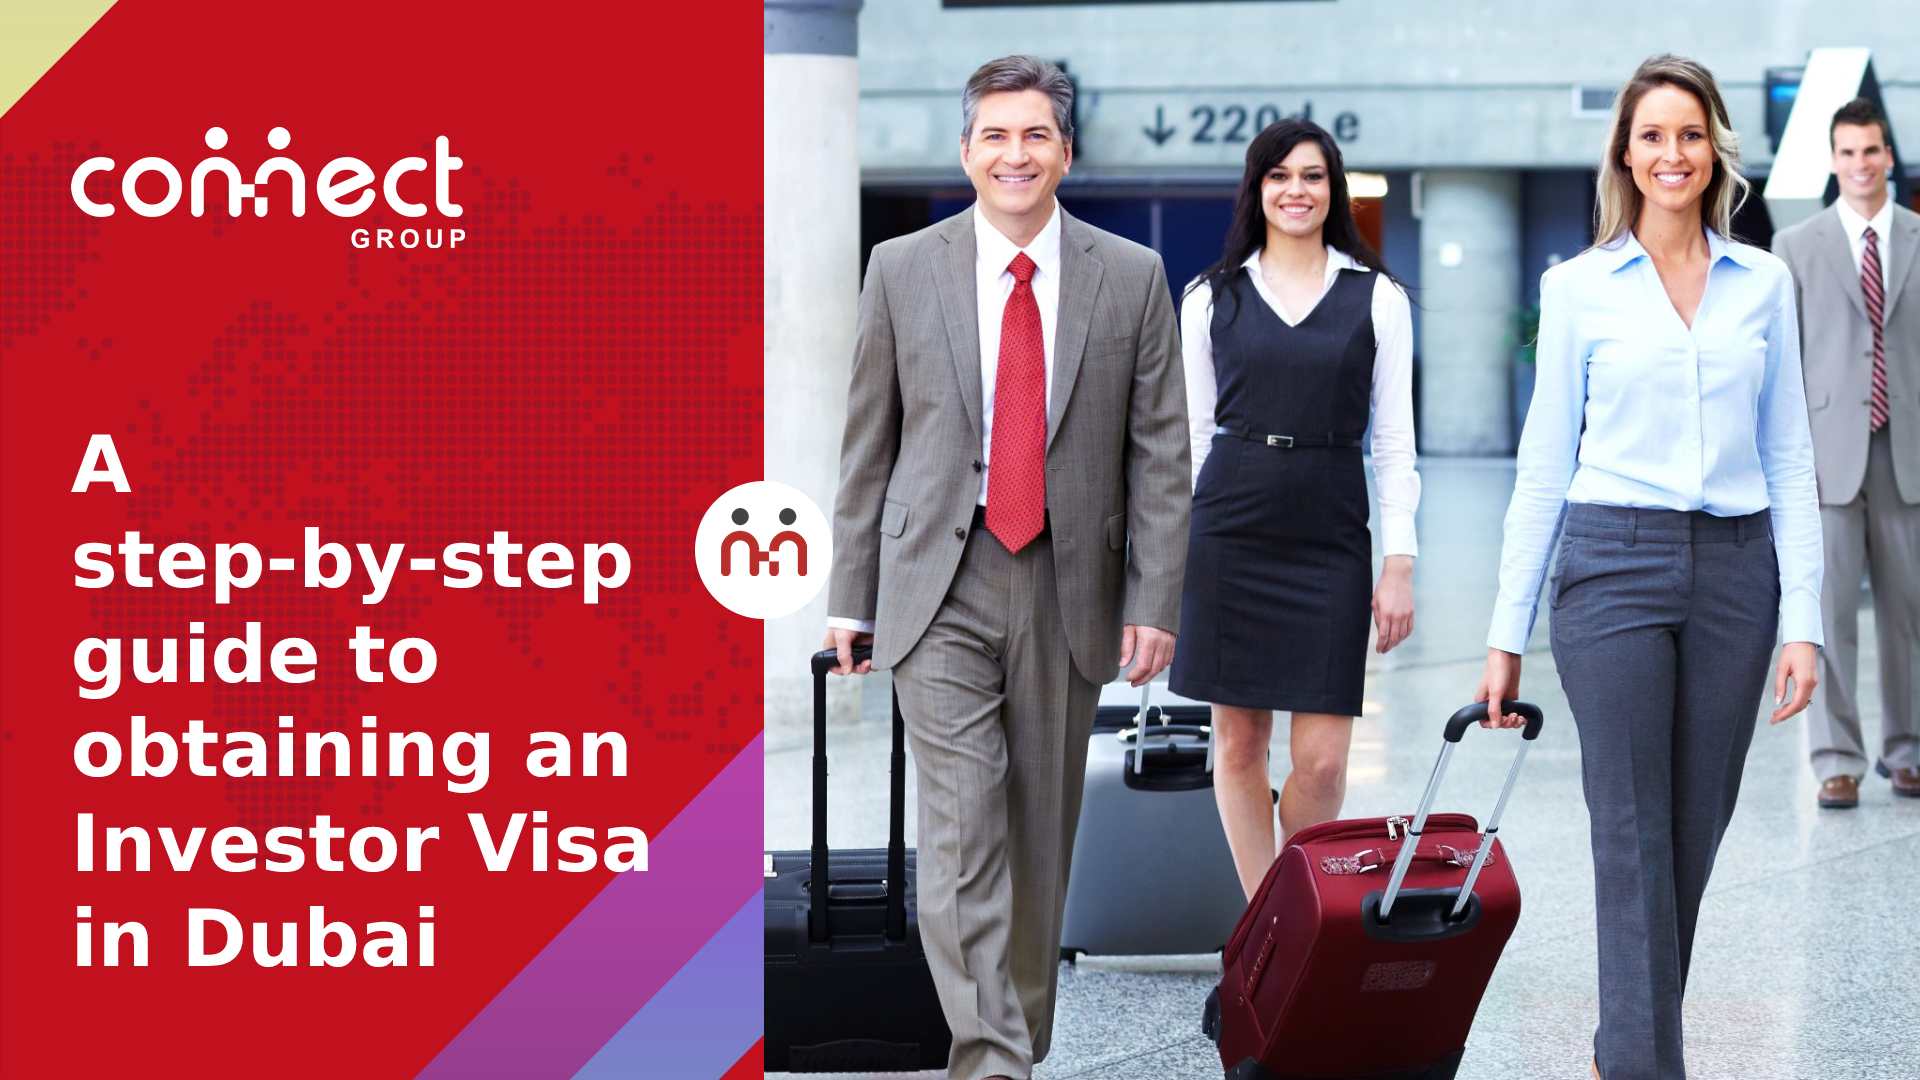 A step-by-step guide to obtaining an Investor Visa in Dubai